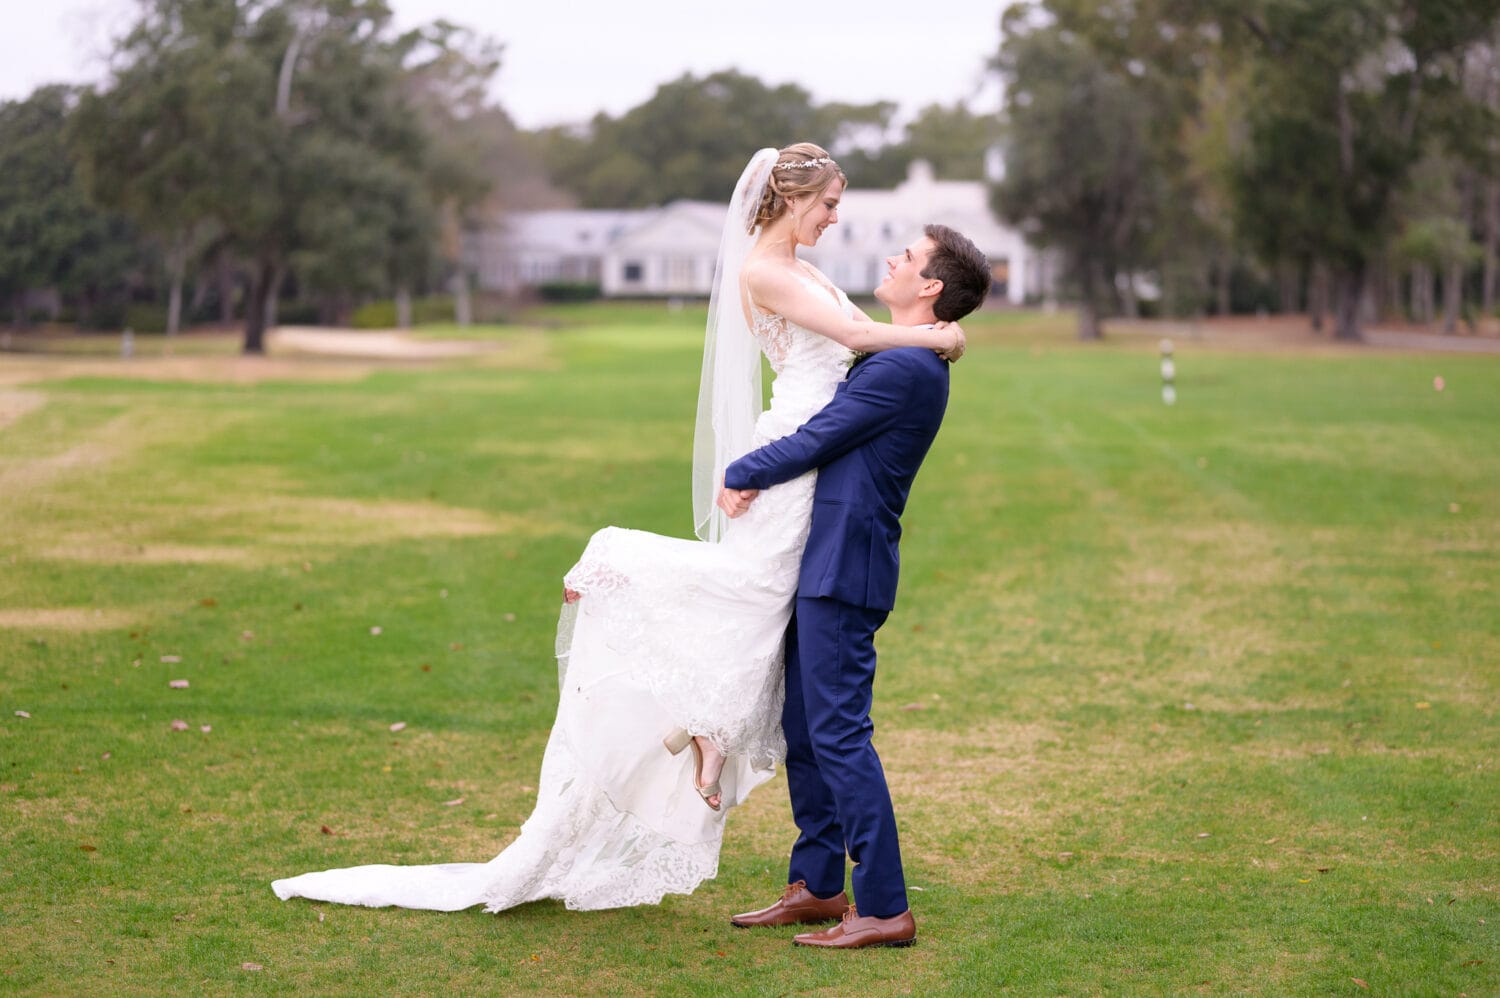 Lifting bride on the golf course - Pawleys Plantation Golf & Country Club